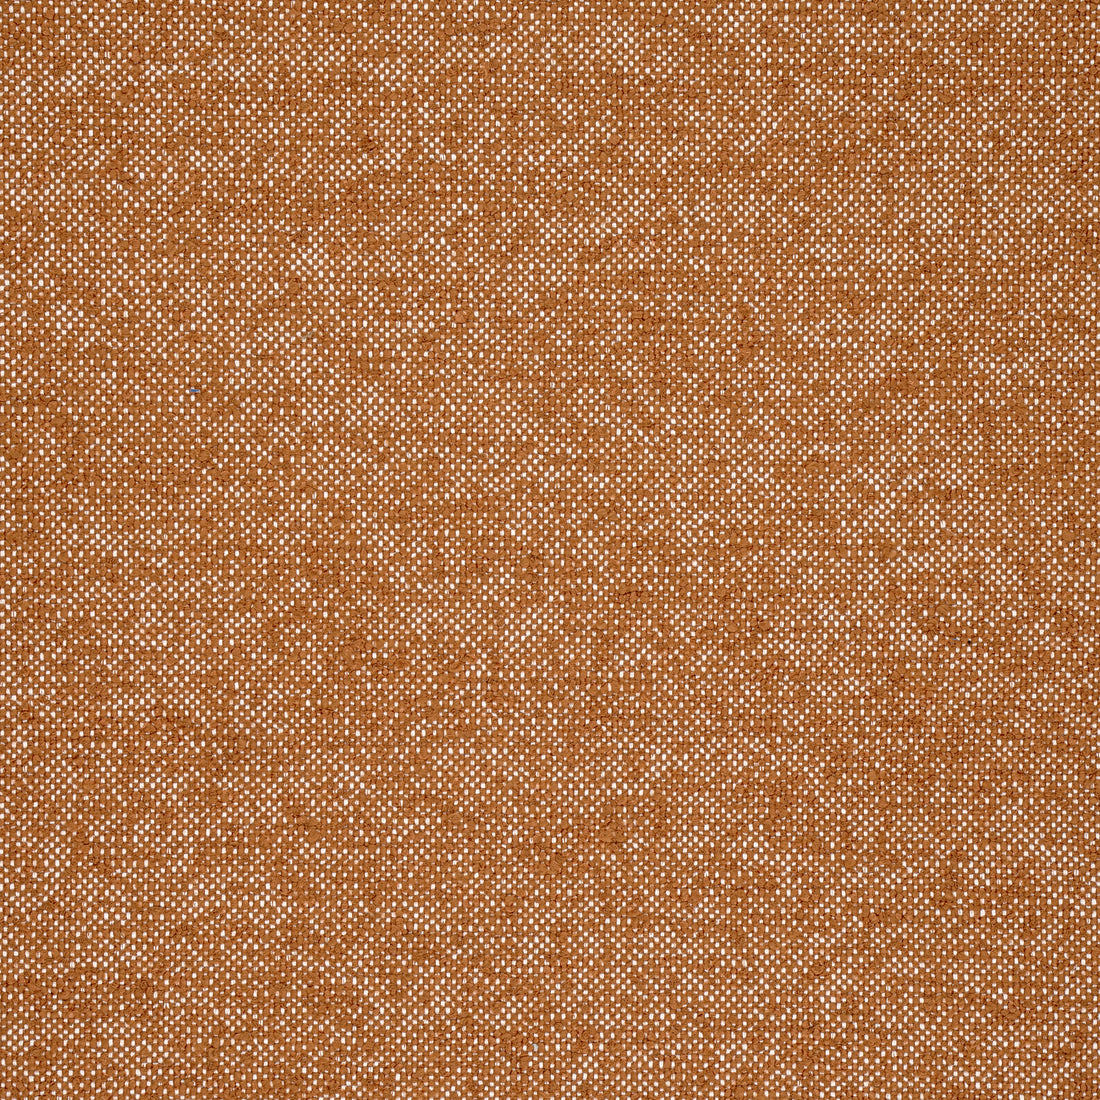 Sasso fabric in copper color - pattern number W77105 - by Thibaut in the Veneto collection